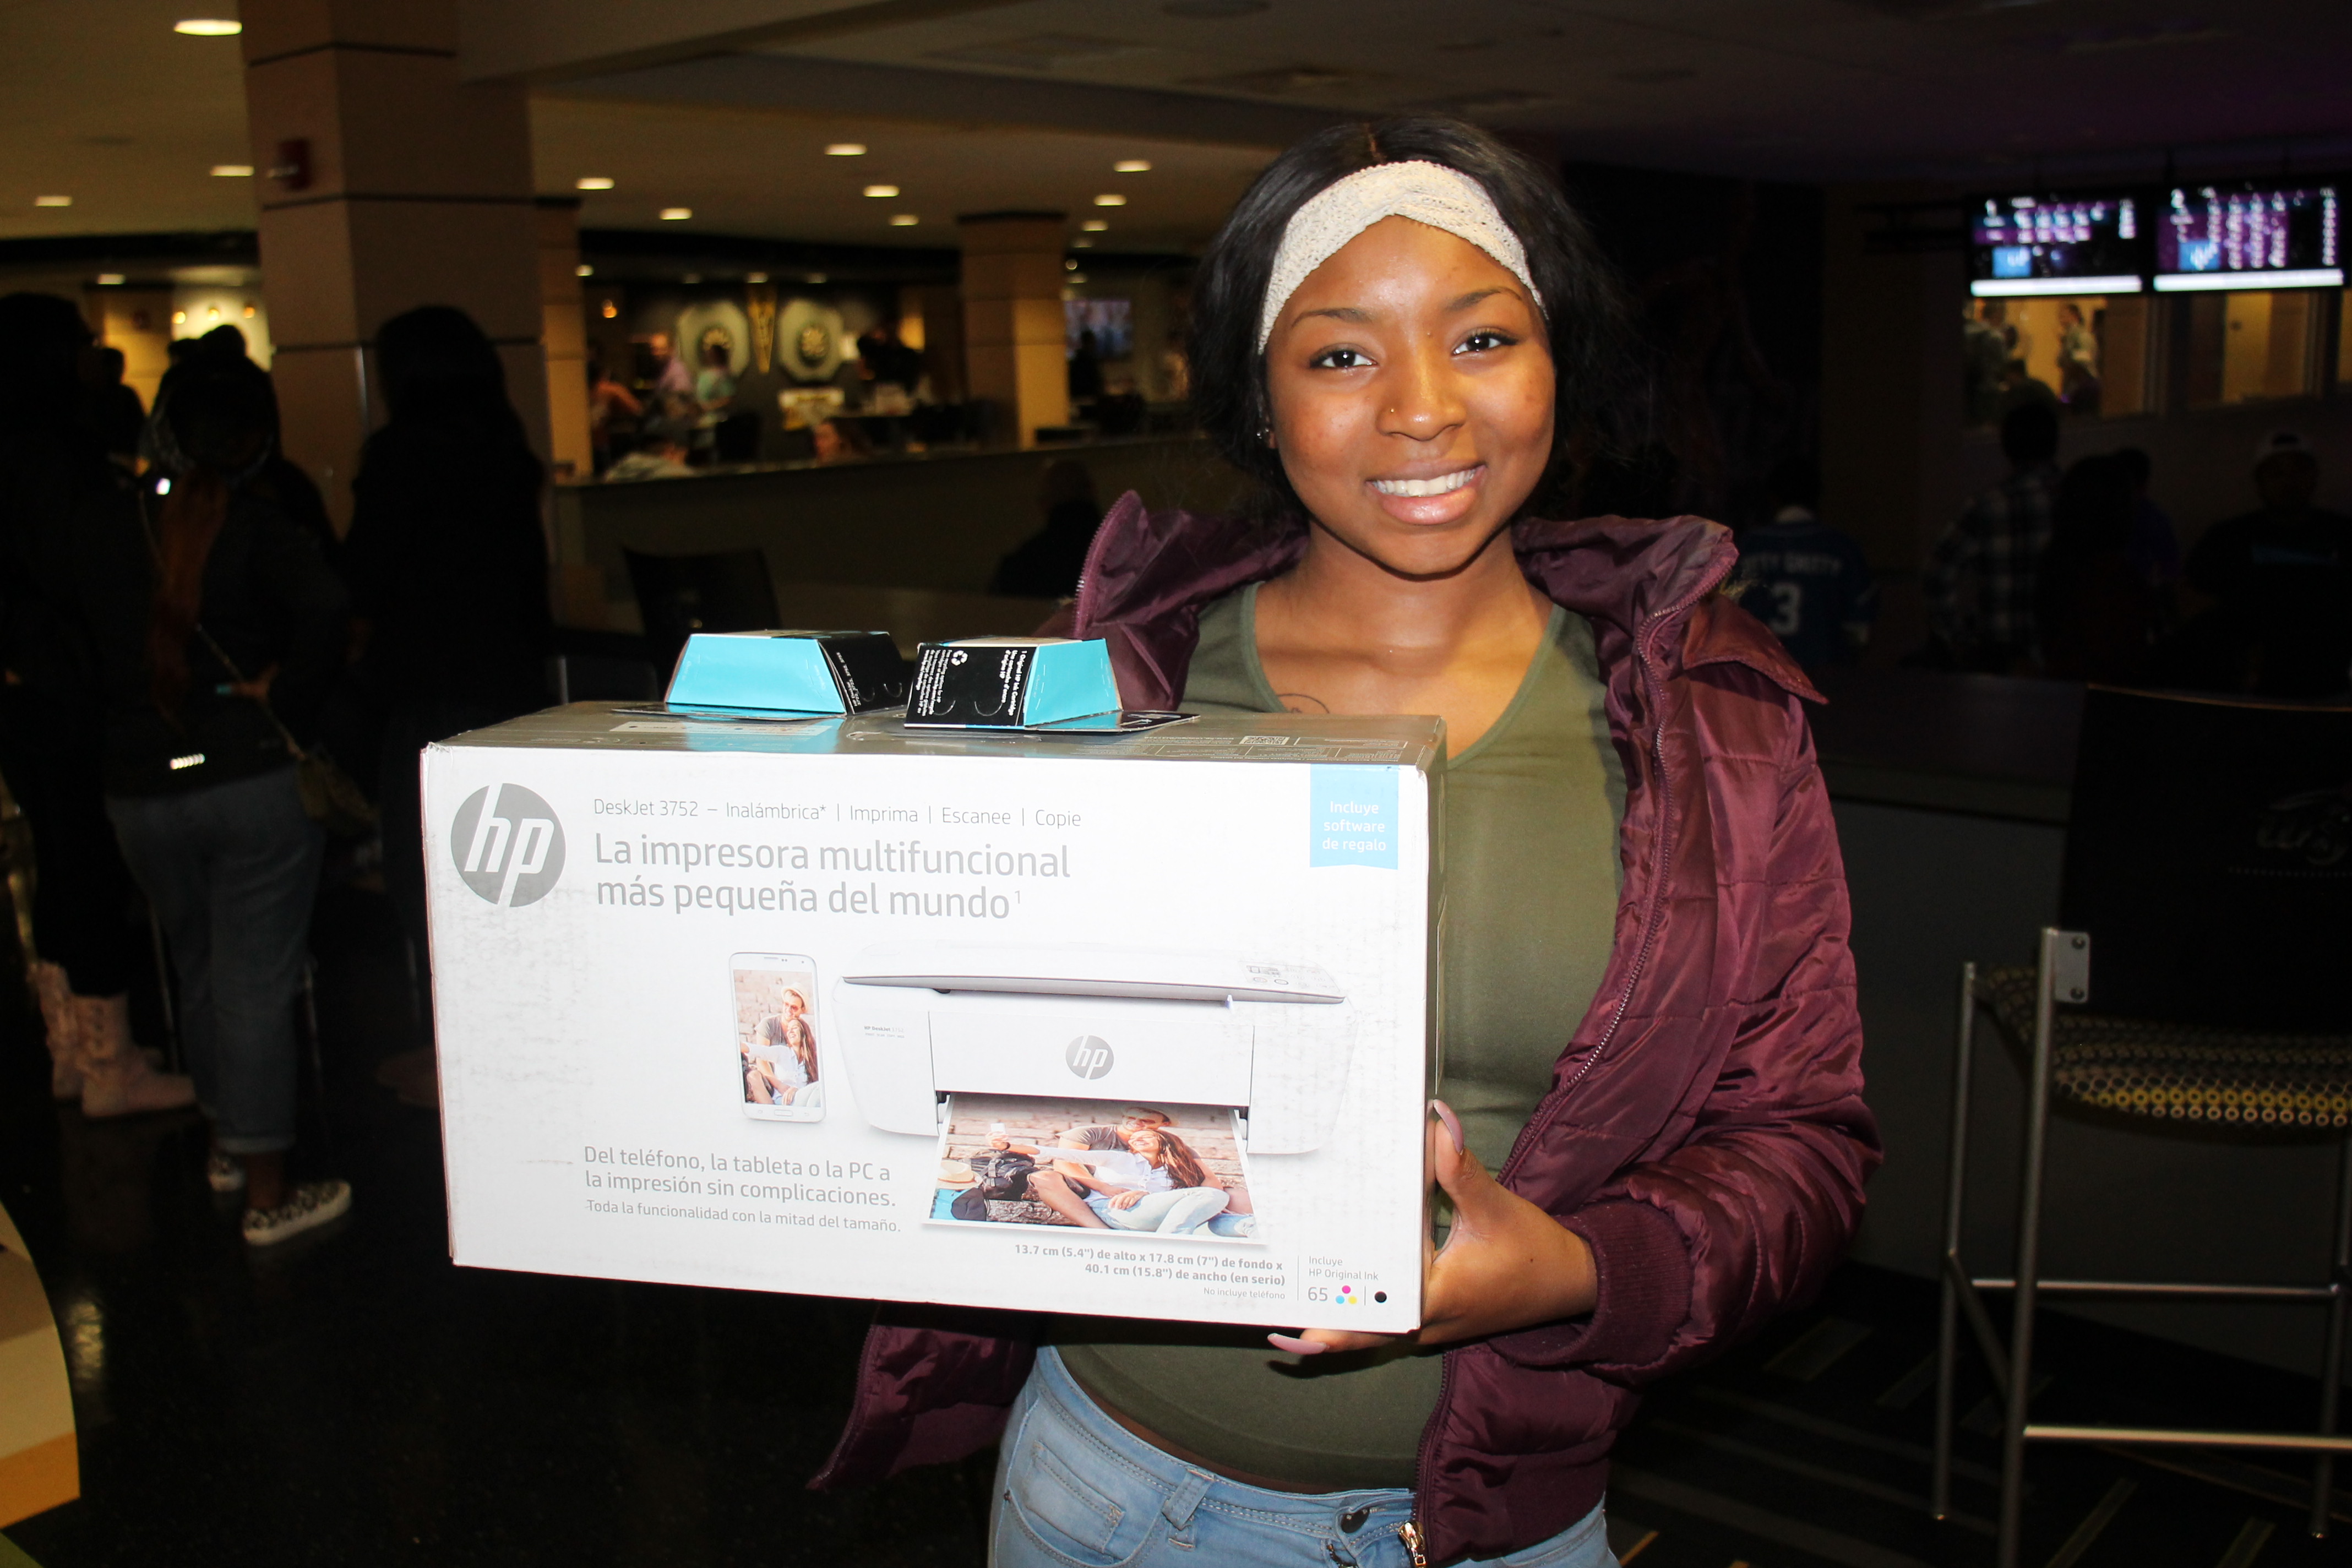 Laila Stigler was the winner of a printer at the Meet and Greek event